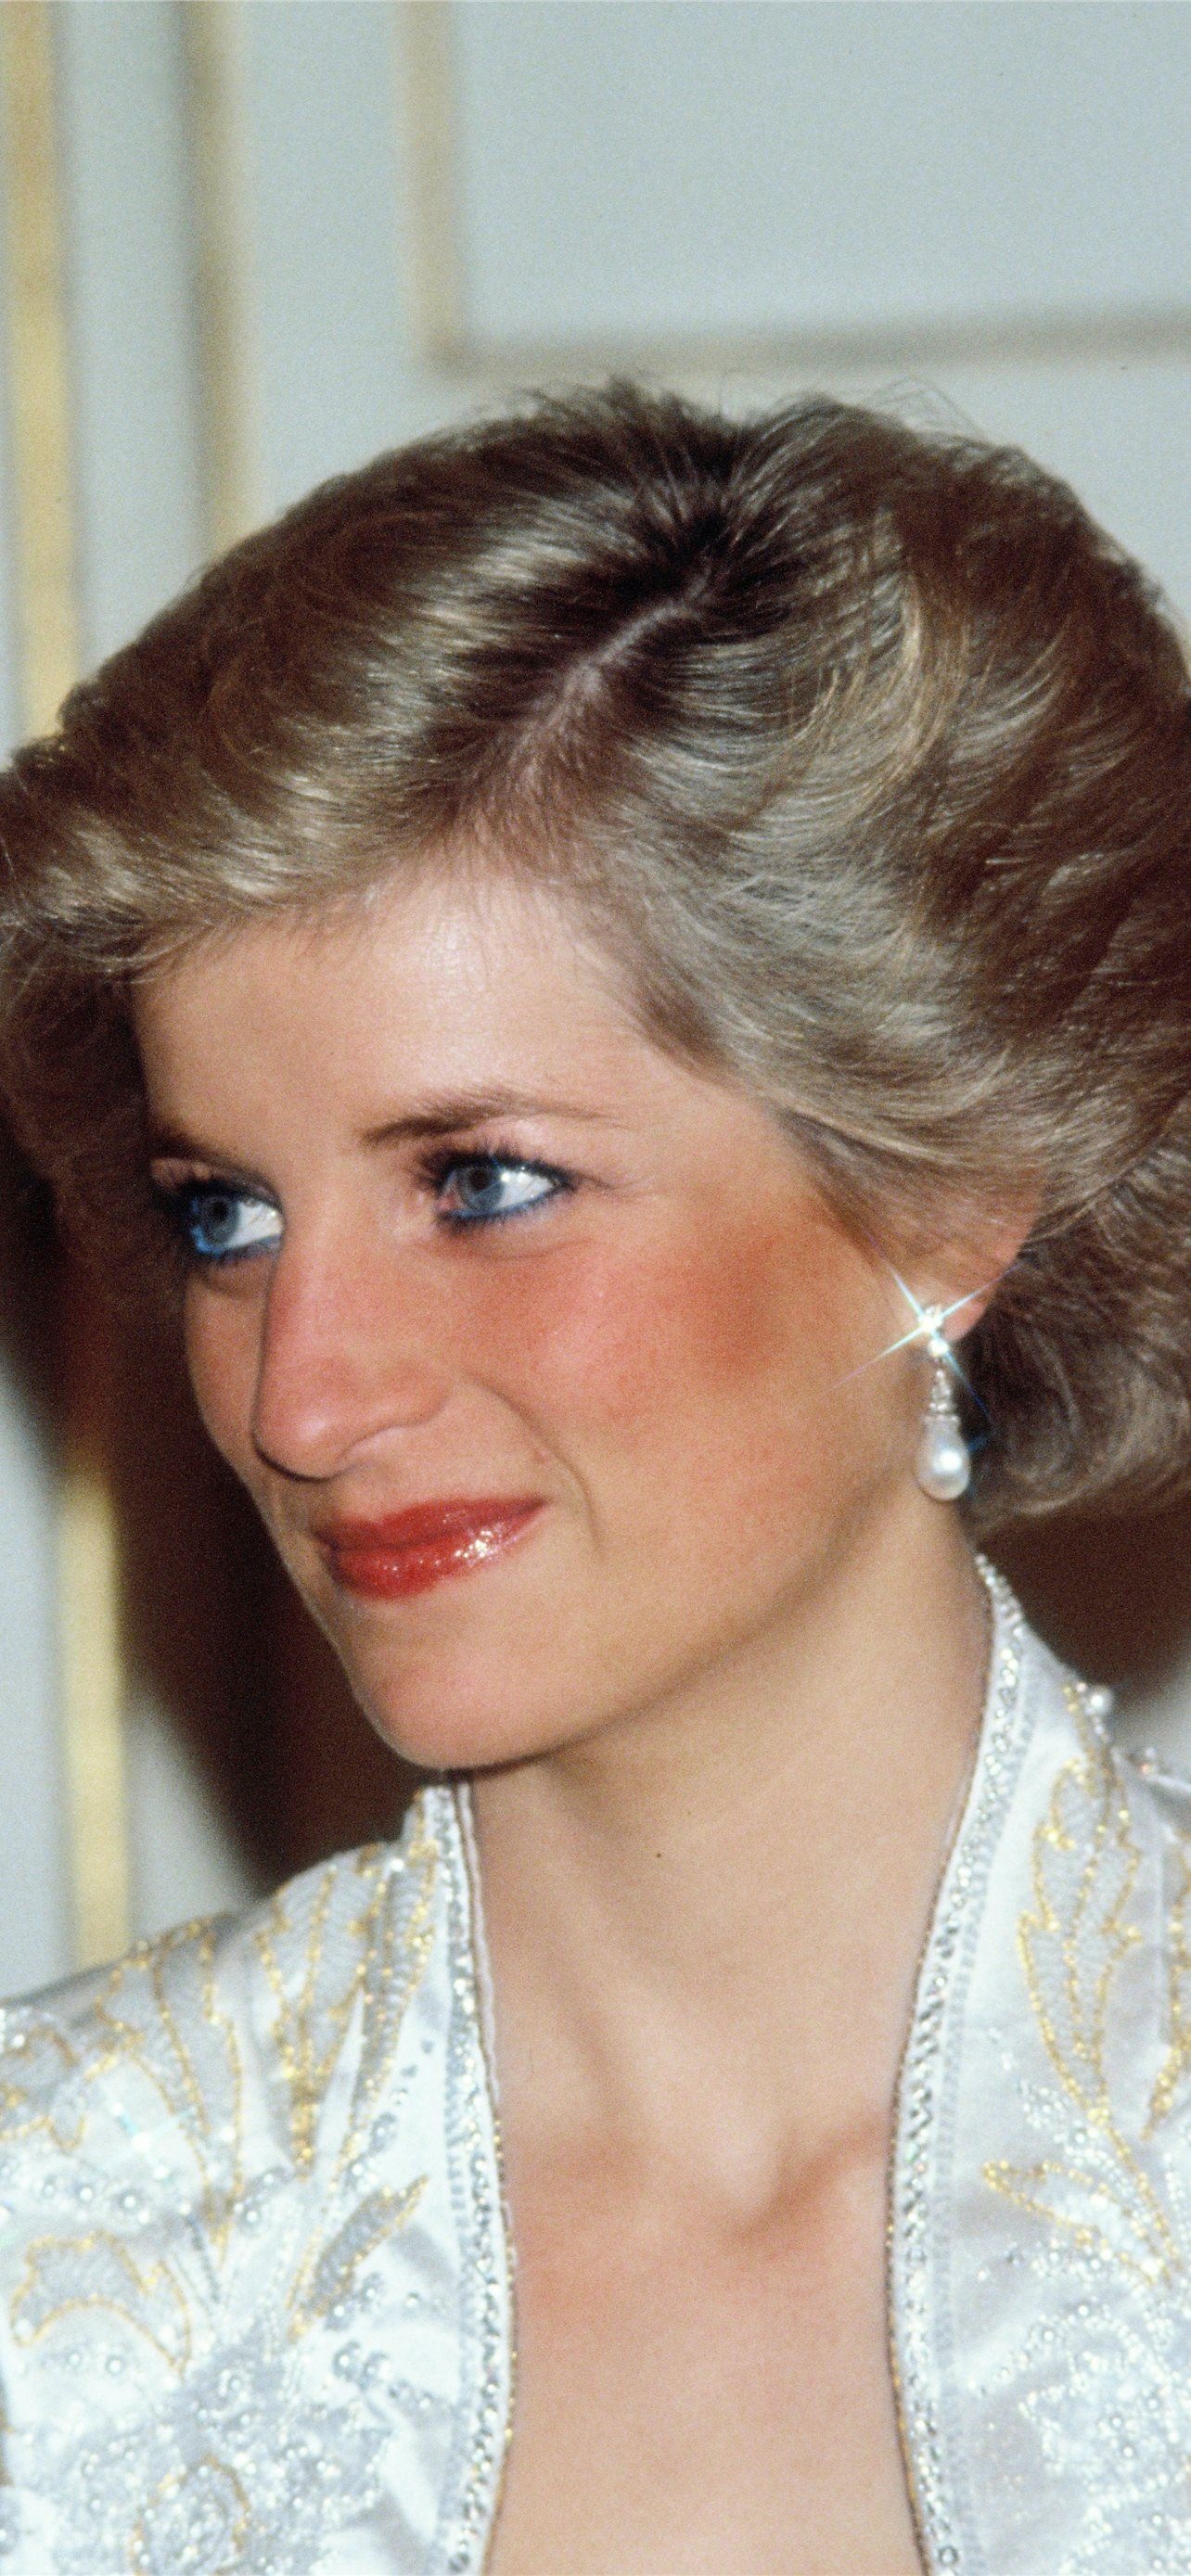 Princess Diana: Princess, A leader of fashion in the 1980s and 1990s. 1290x2780 HD Wallpaper.